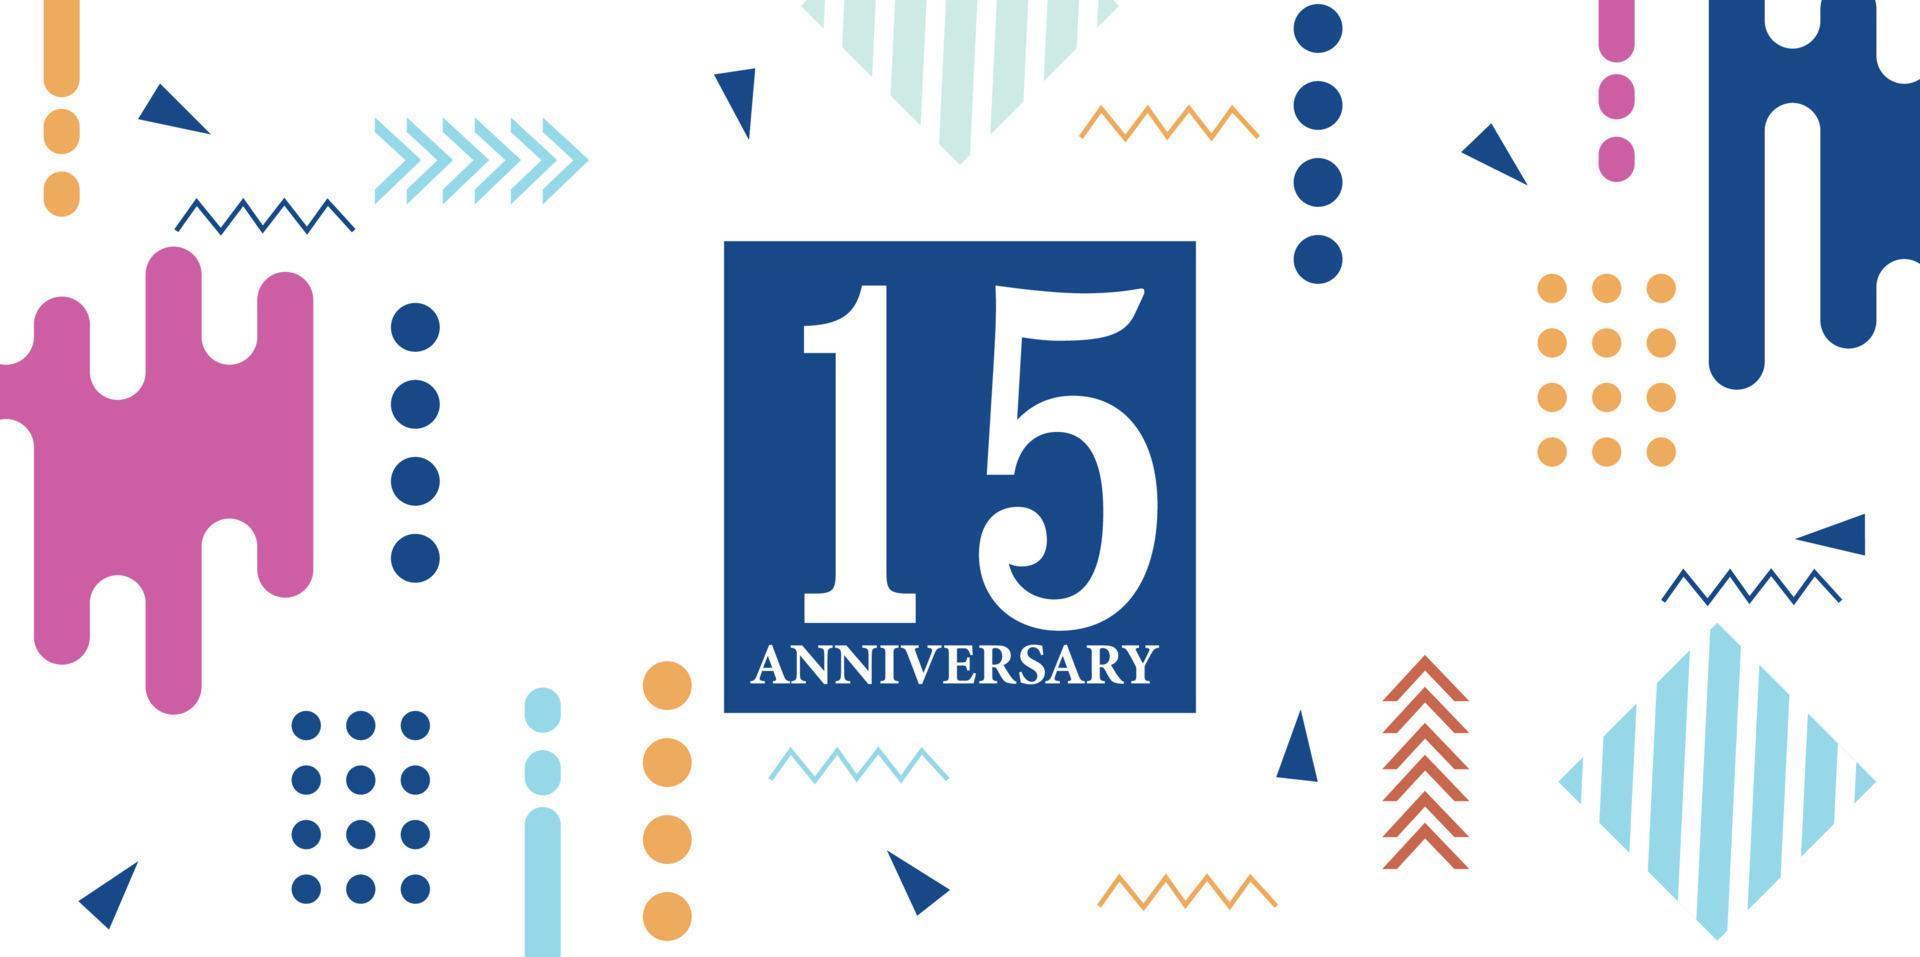 15 years anniversary celebration logotype white numbers font in blue shape with colorful abstract design on white background vector illustration